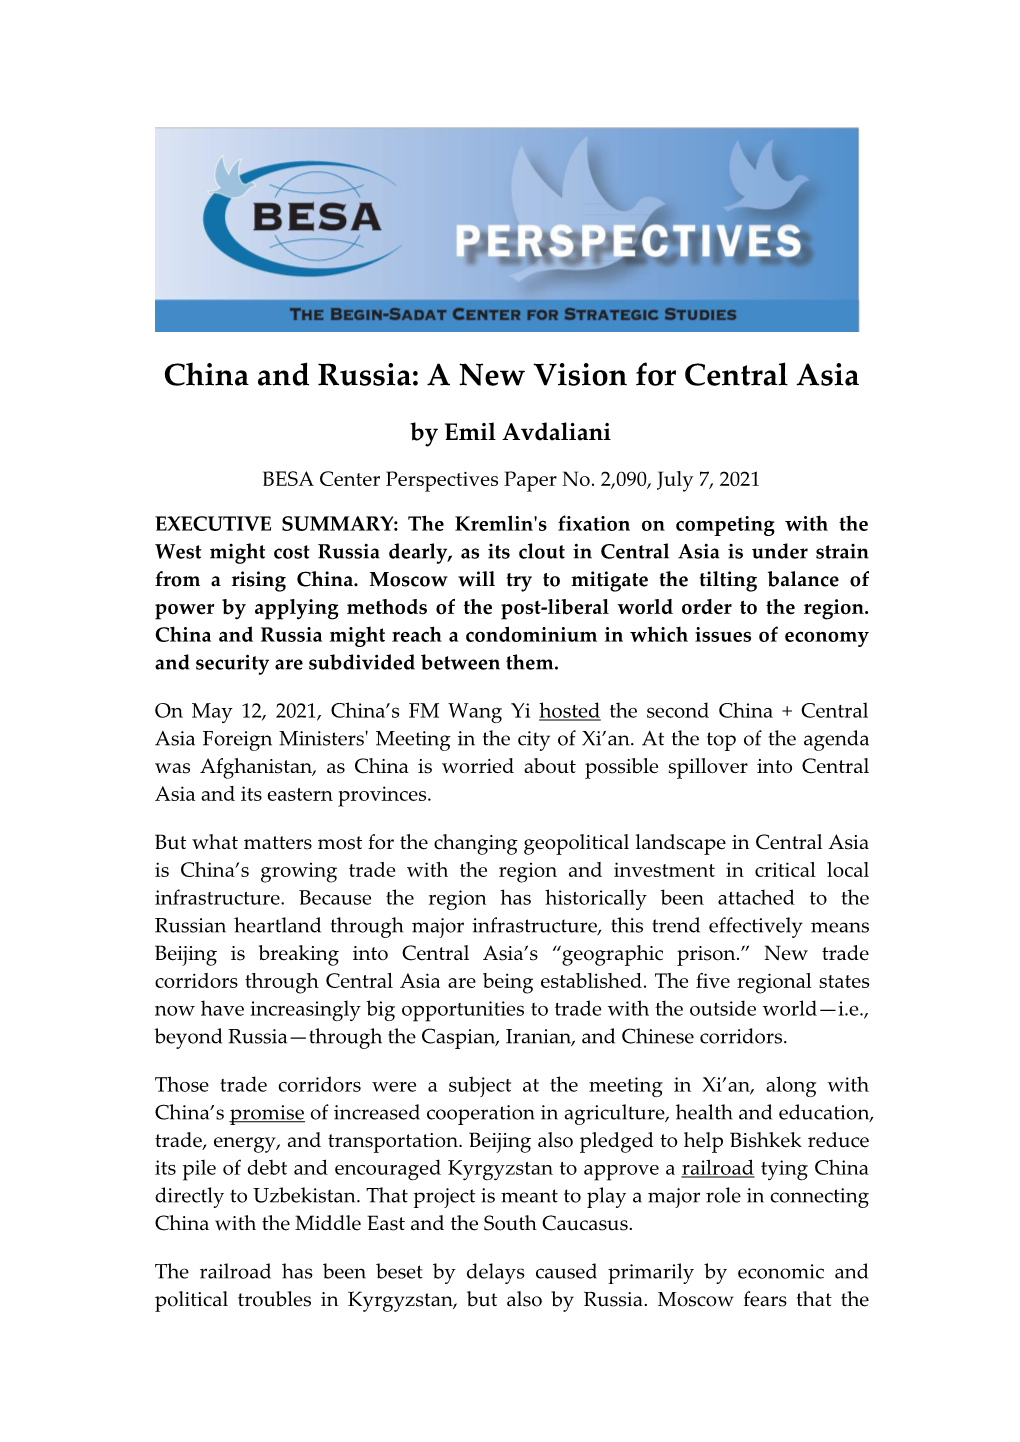 China and Russia: a New Vision for Central Asia